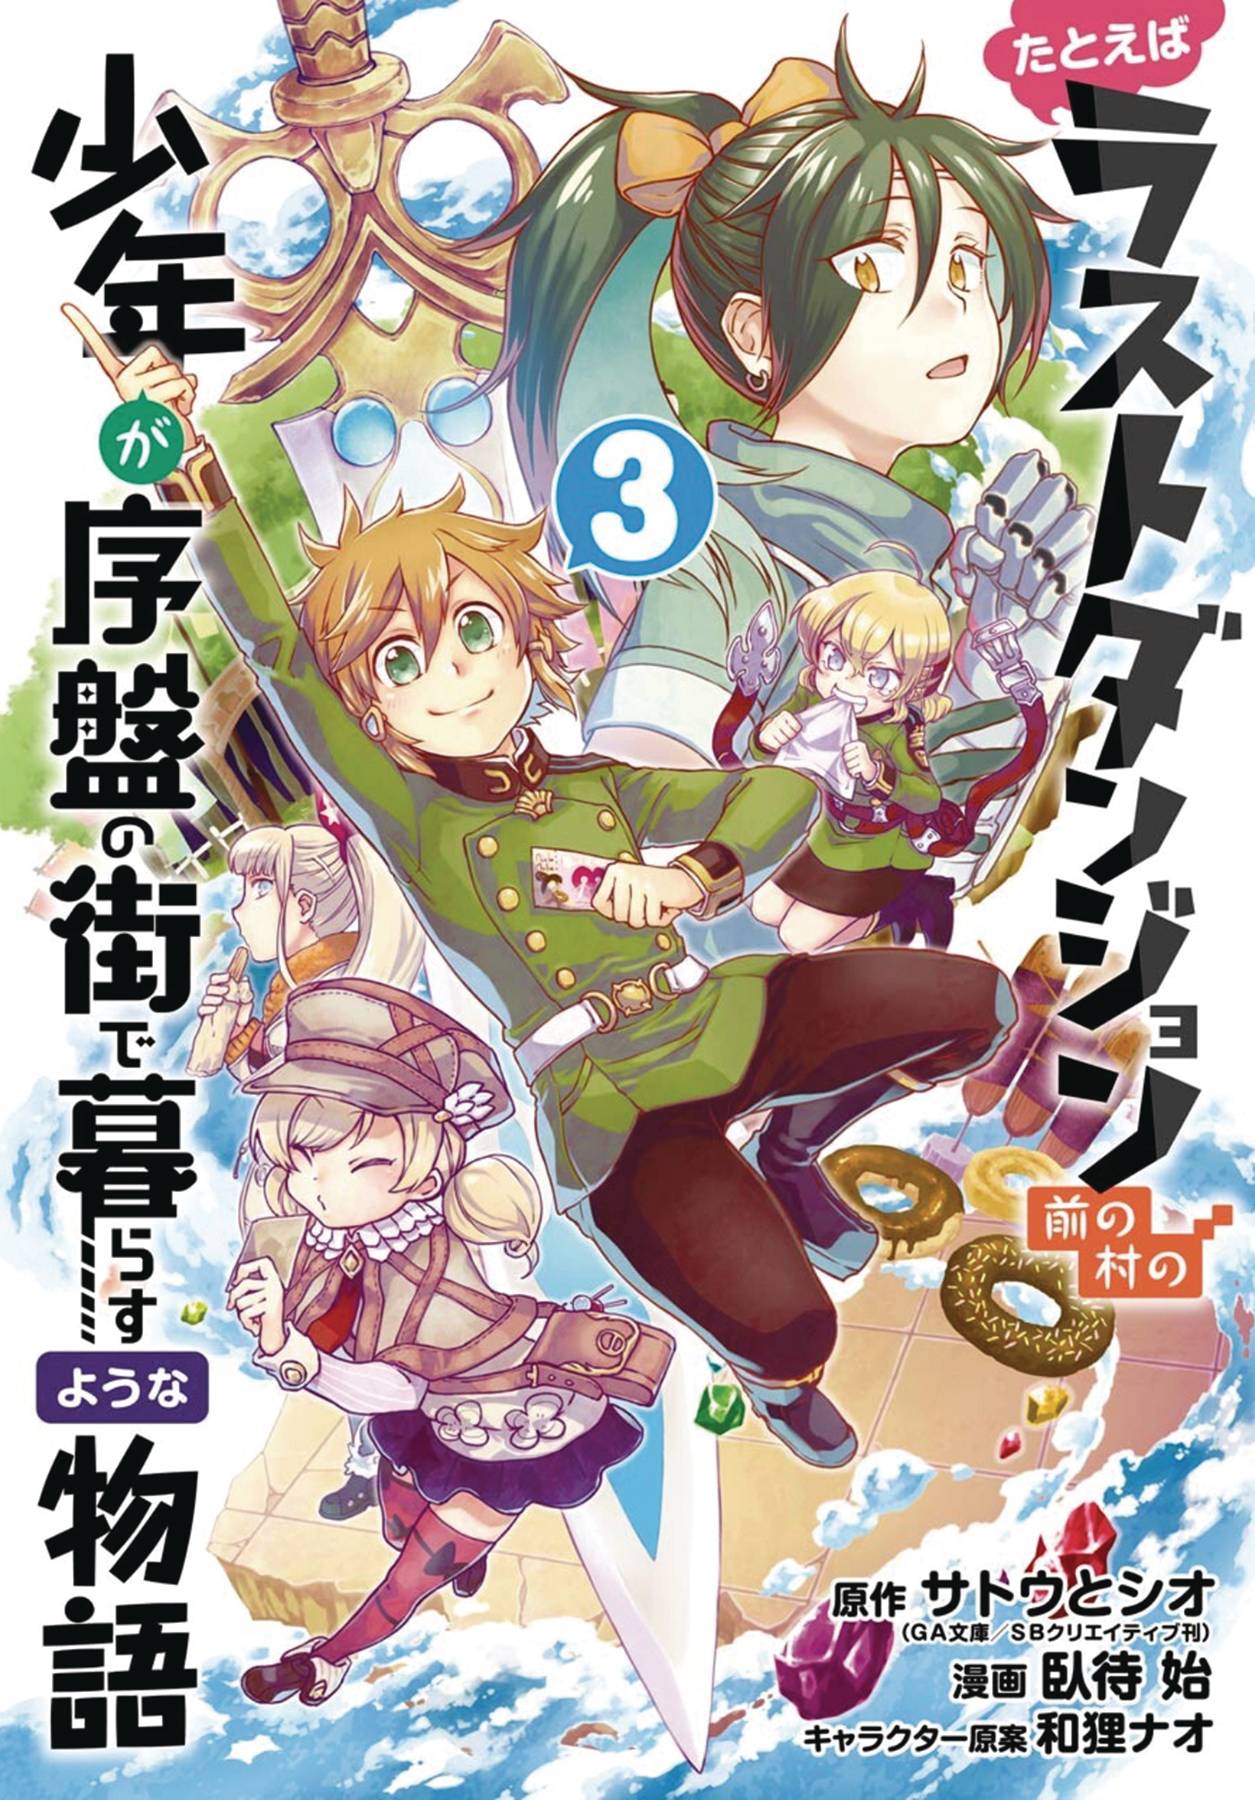 Suppose a Kid from the Last Dungeon Boonies Moved to a Starter Town, Vol.  13 (light novel)